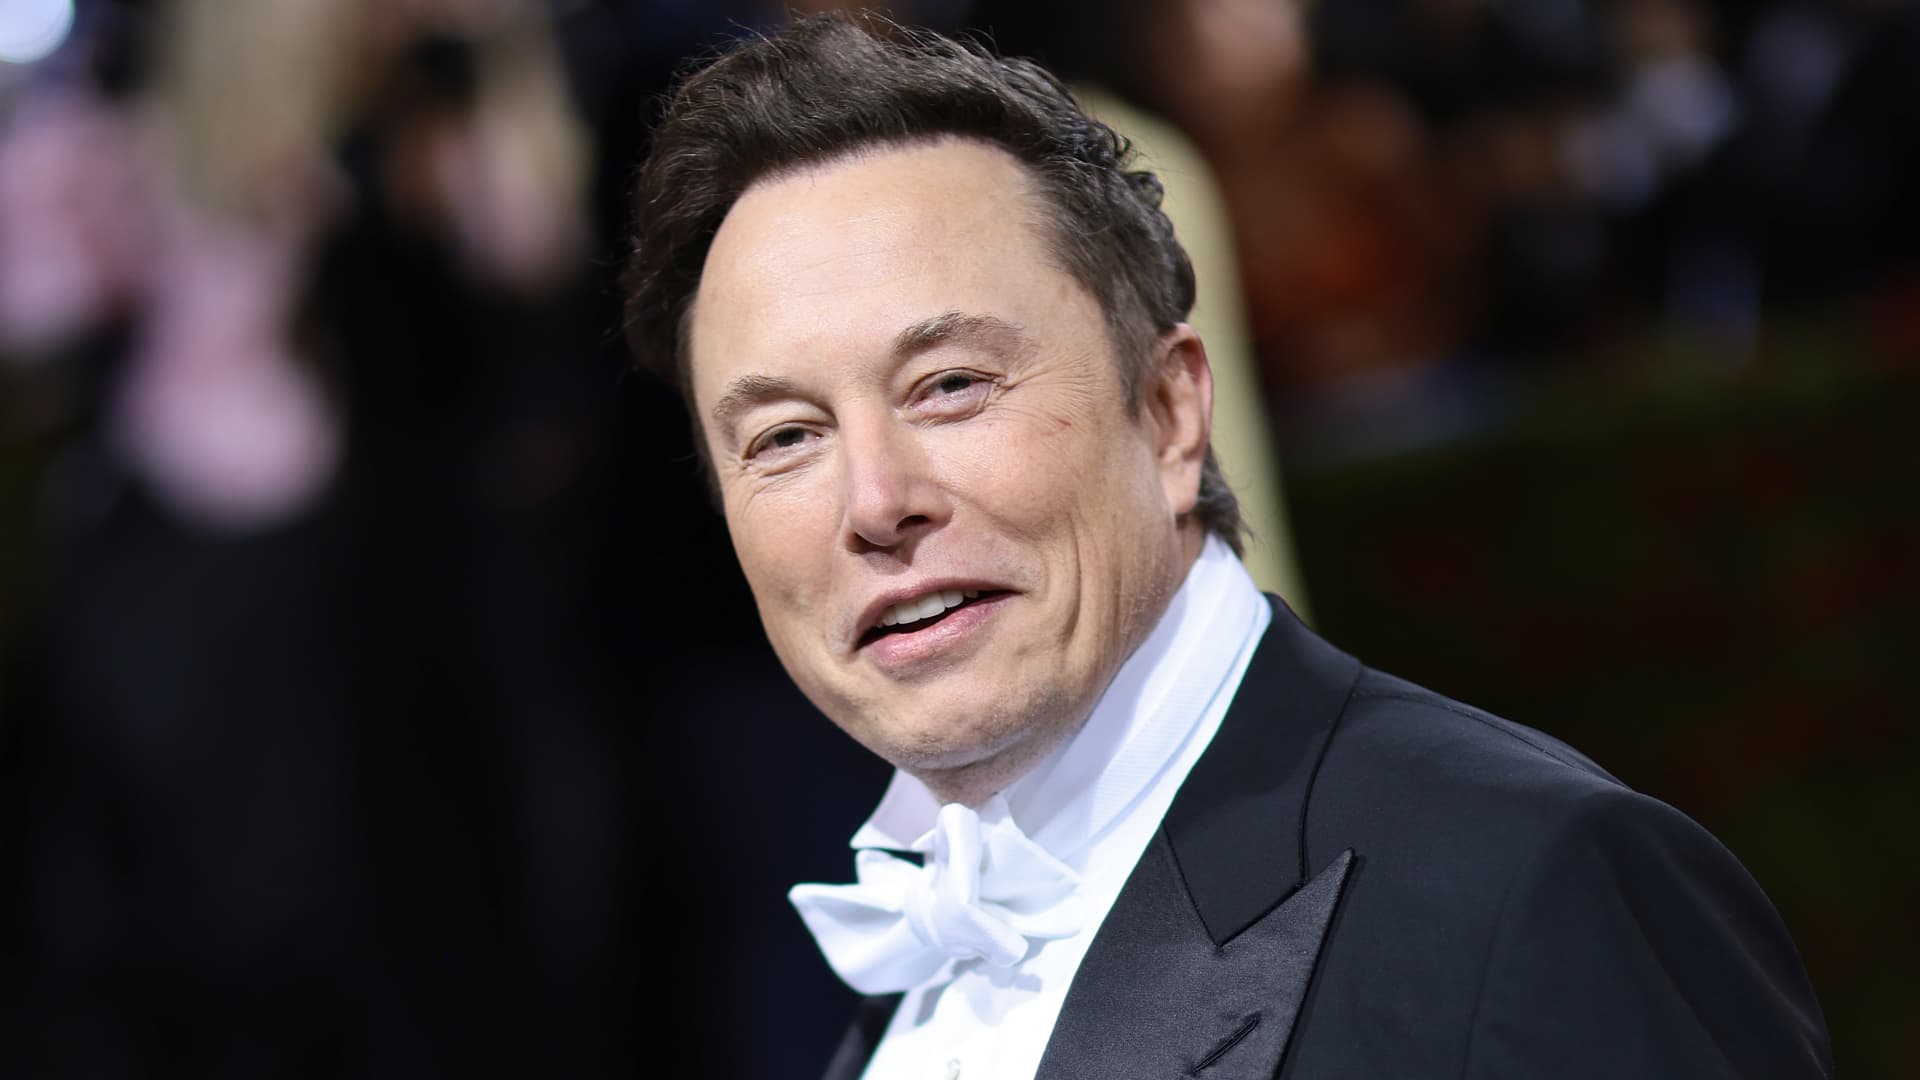 Elon Musk encourages independents to vote for a Republican Congress ahead of midterm elections